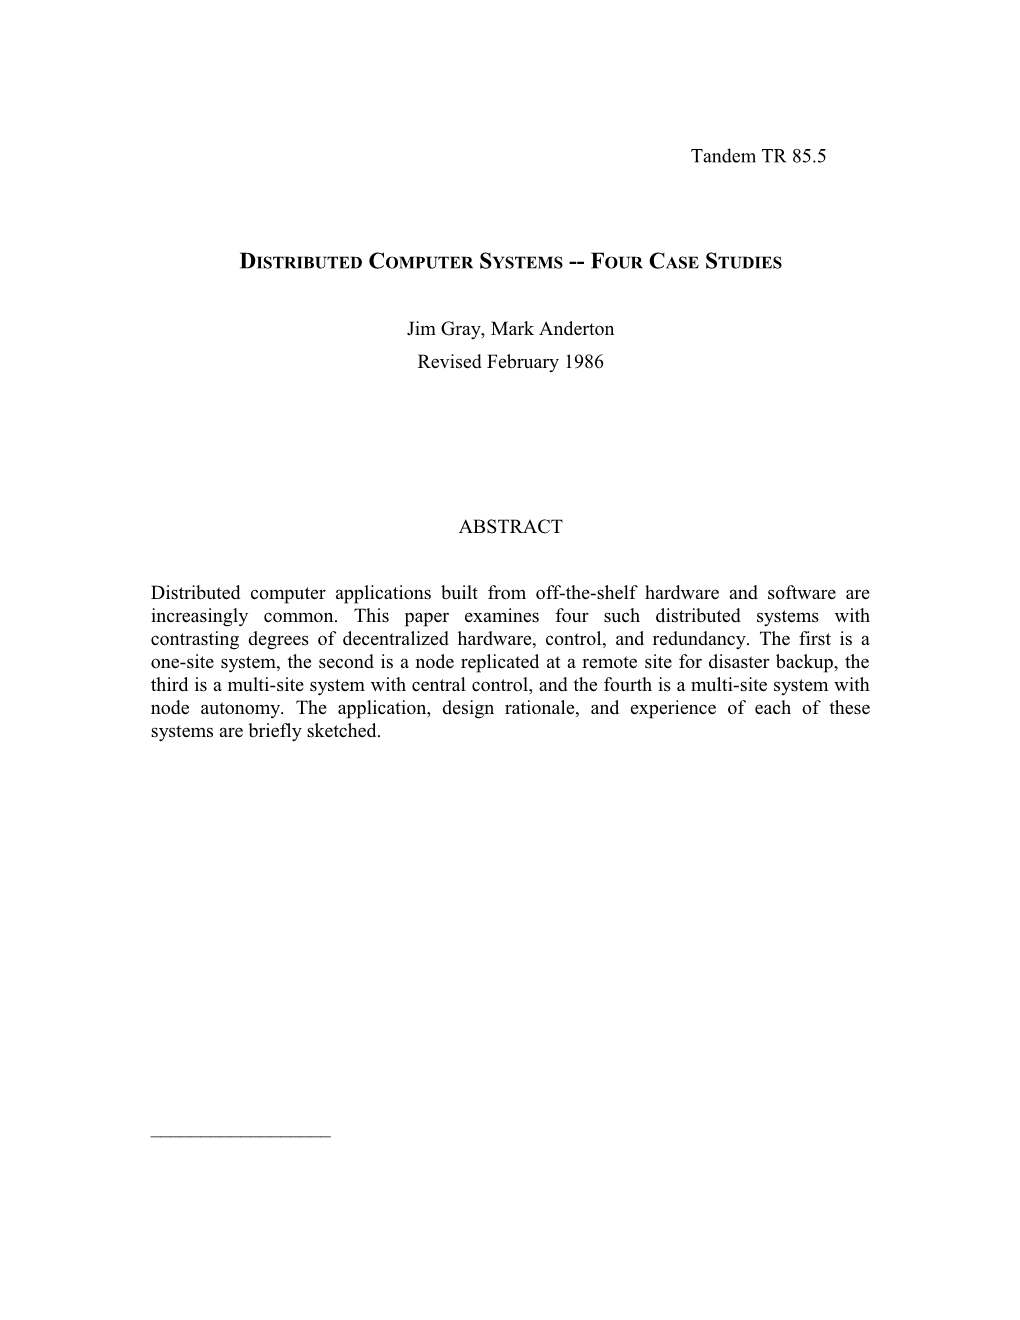 Distributed Computer Systems Four Case Studies